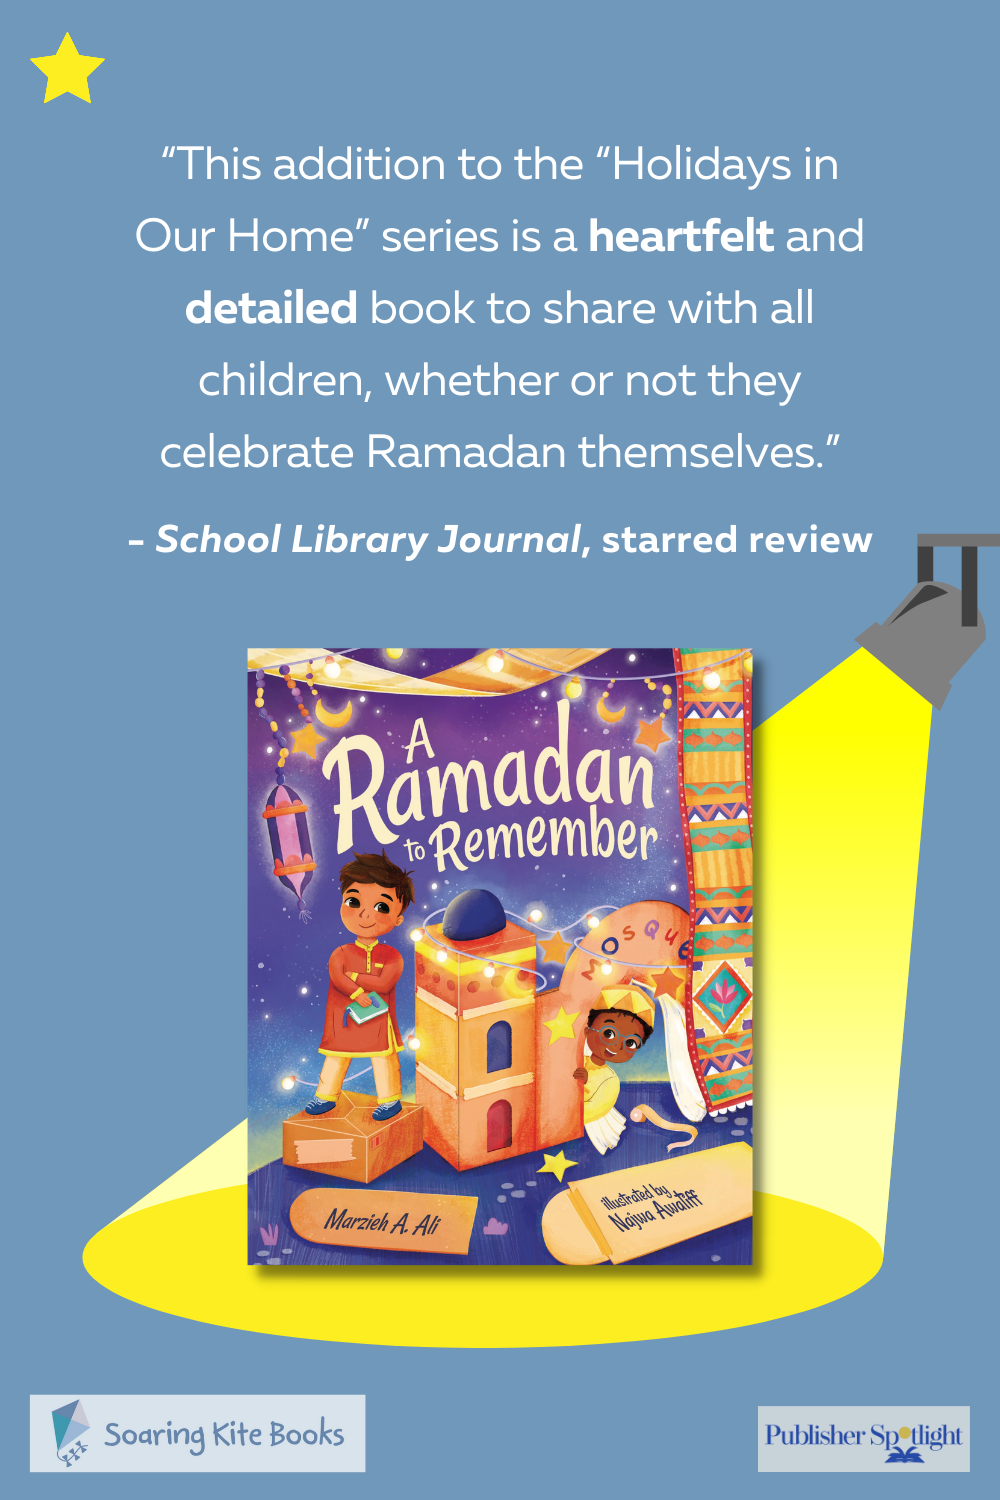 Starred Review Graphic Ramadan to Remember